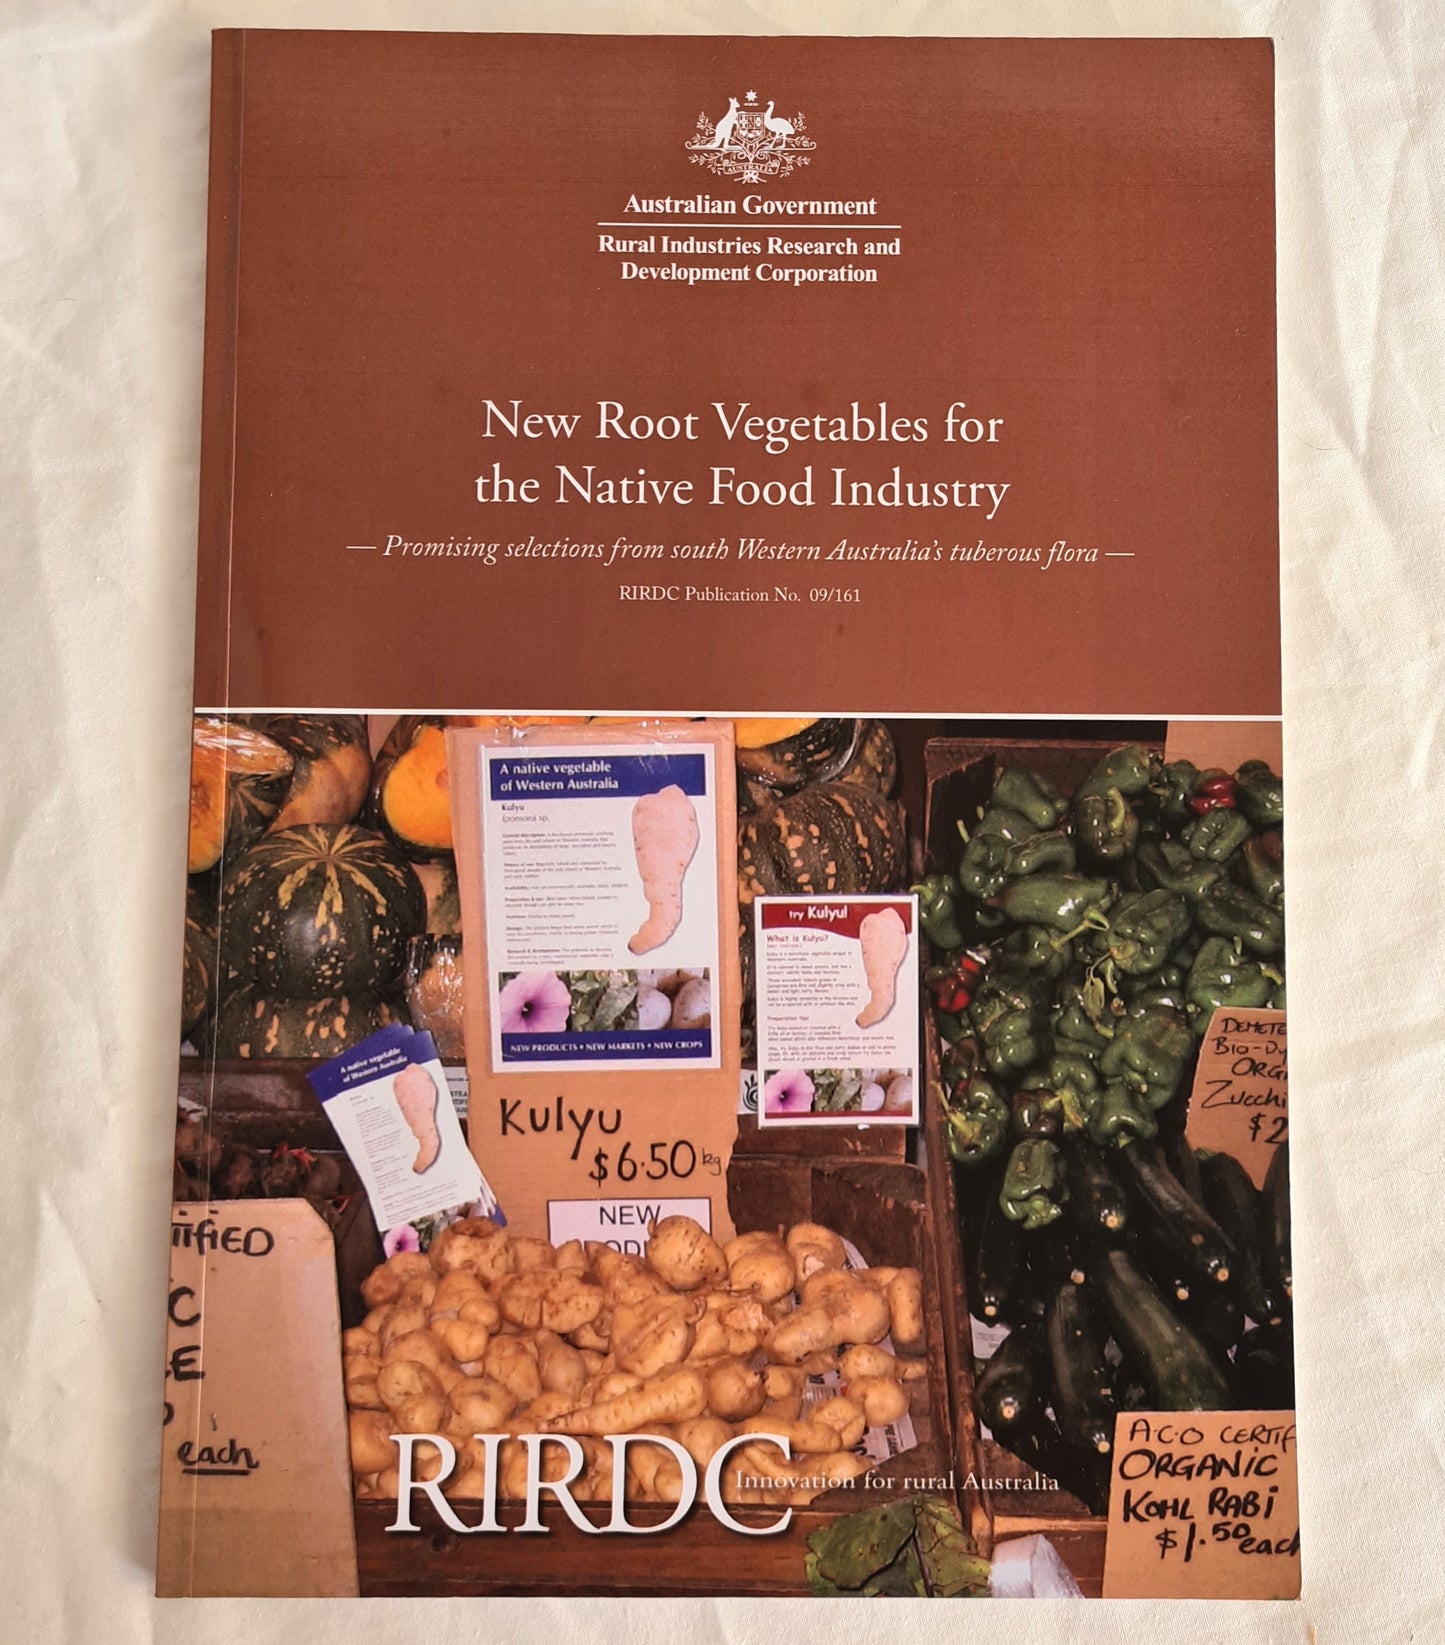 New Root Vegetables for the Native Food Industry  Promising selections from south Western Australia’s tuberous flora  by Woodall GS, Moule ML, Eckersley P, Boxshall B, and Puglisi B